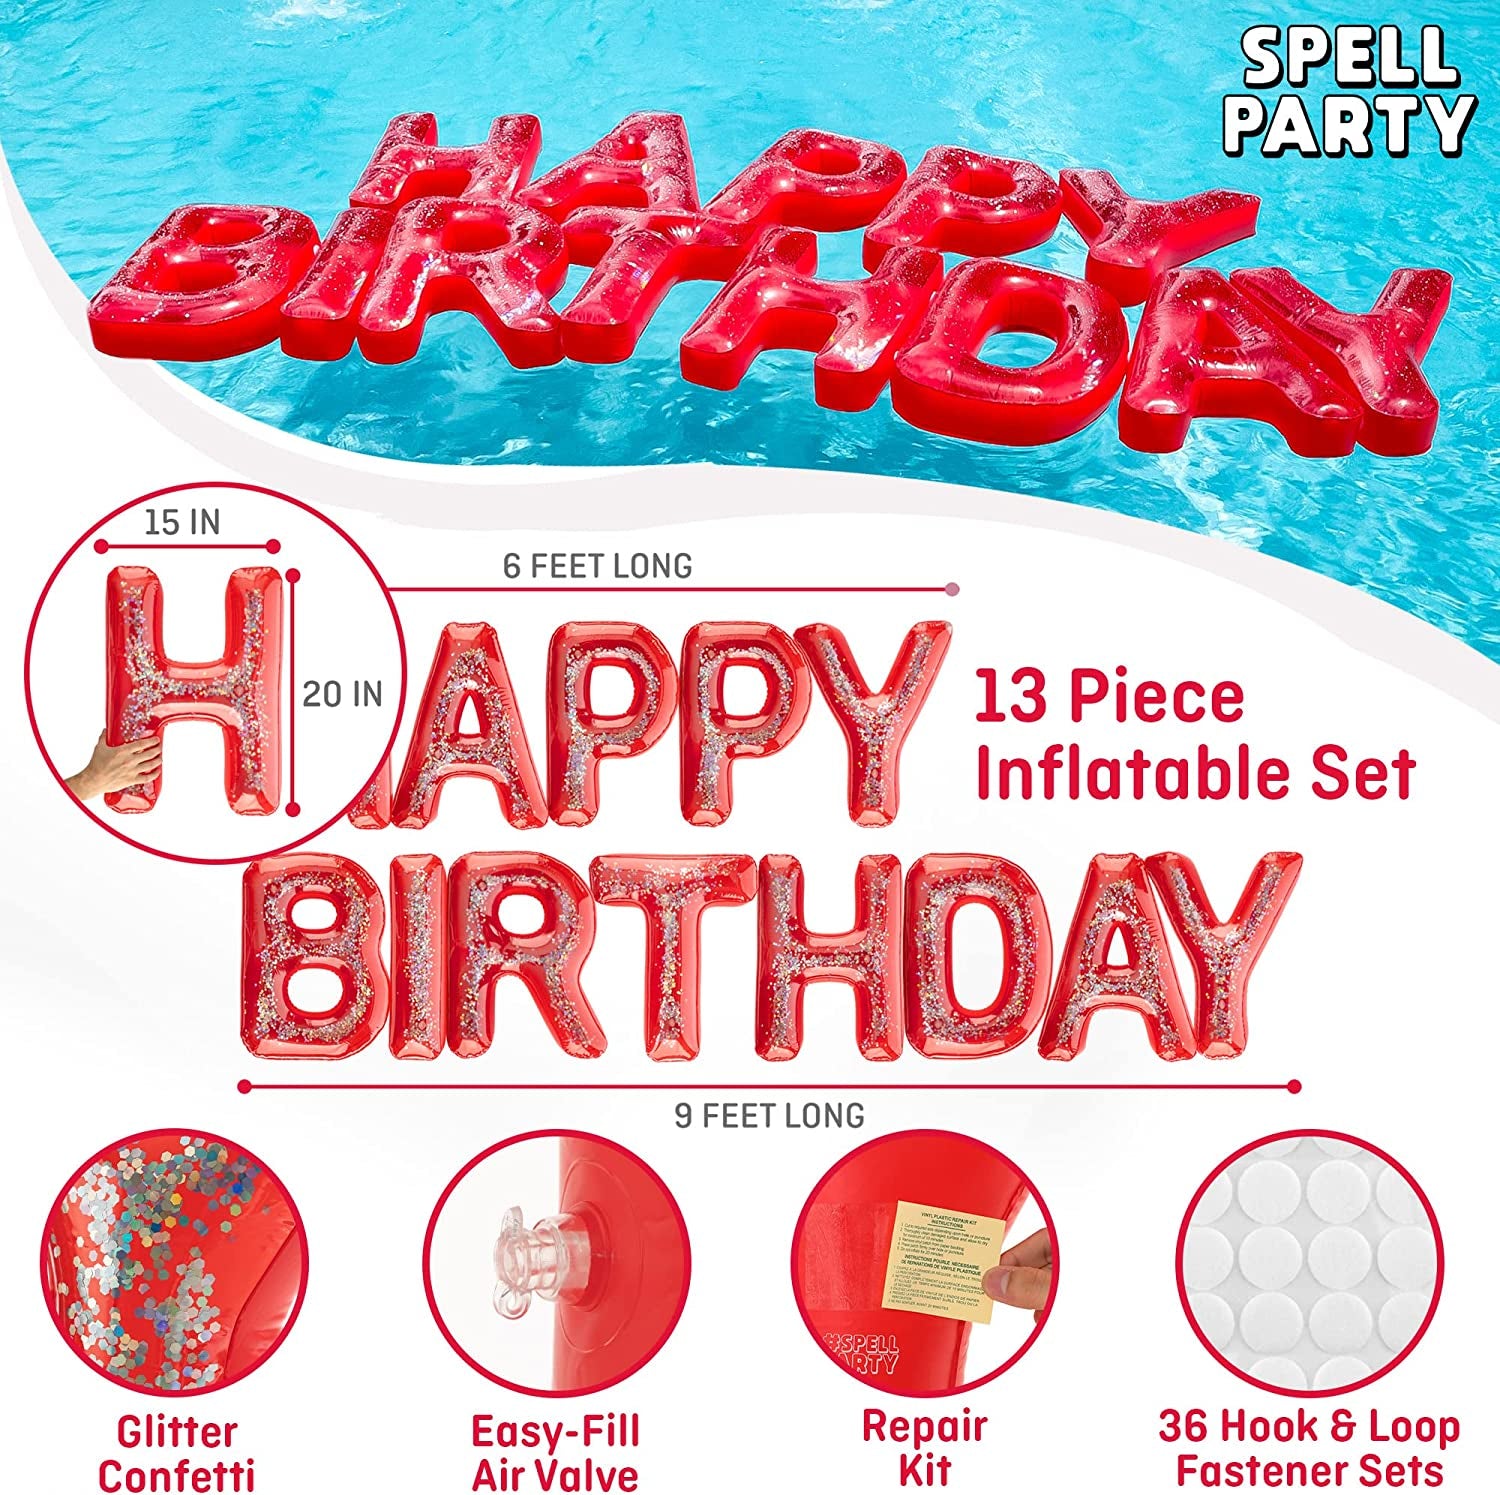 Large Floating Happy Birthday Pool Letters - Pool Party Decorations for Kids 